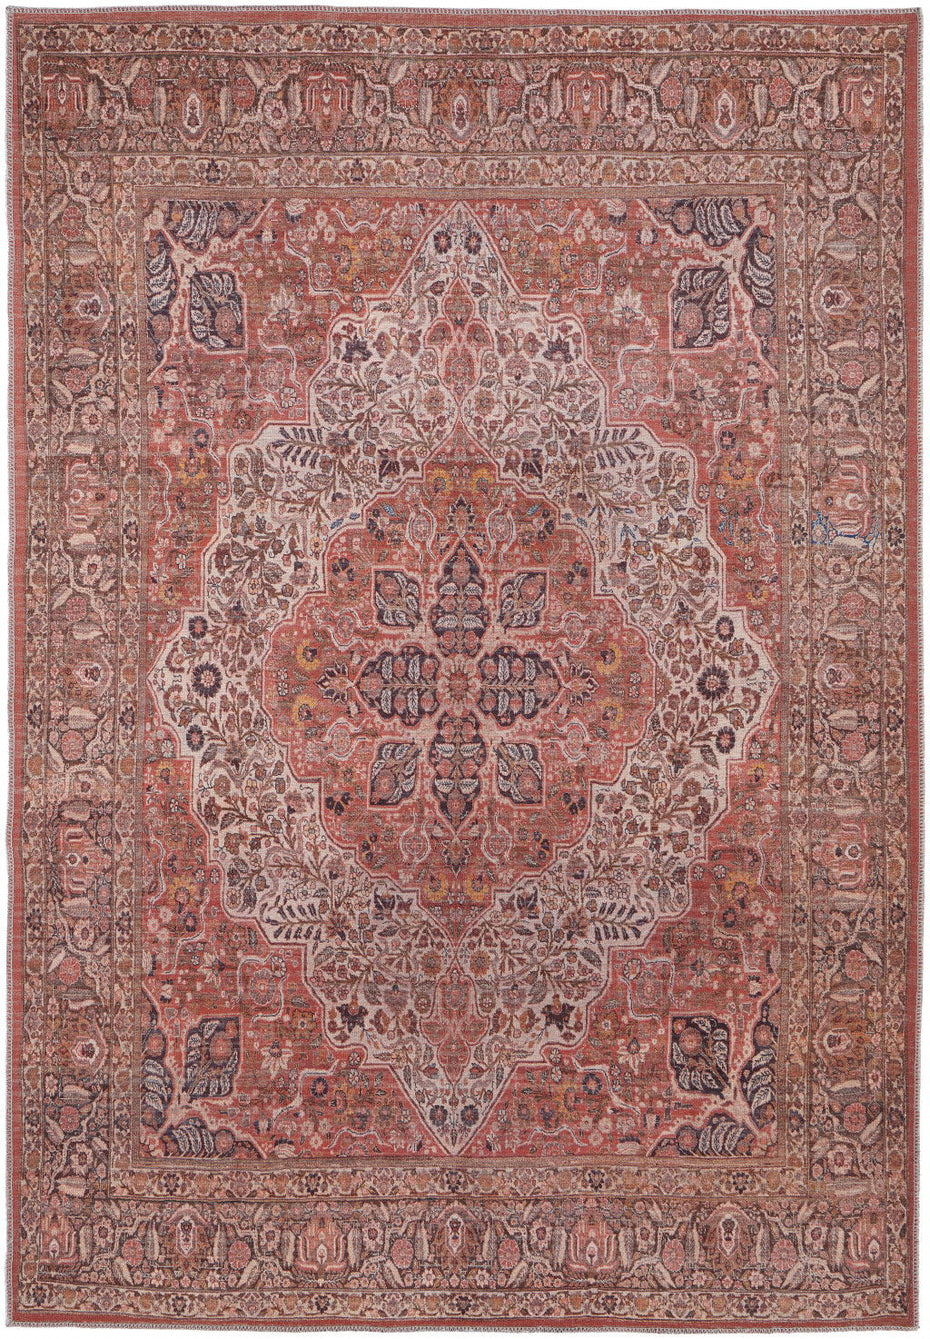 Floral Power Loom Area Rug - Red Tan And Pink - 2' X 3'